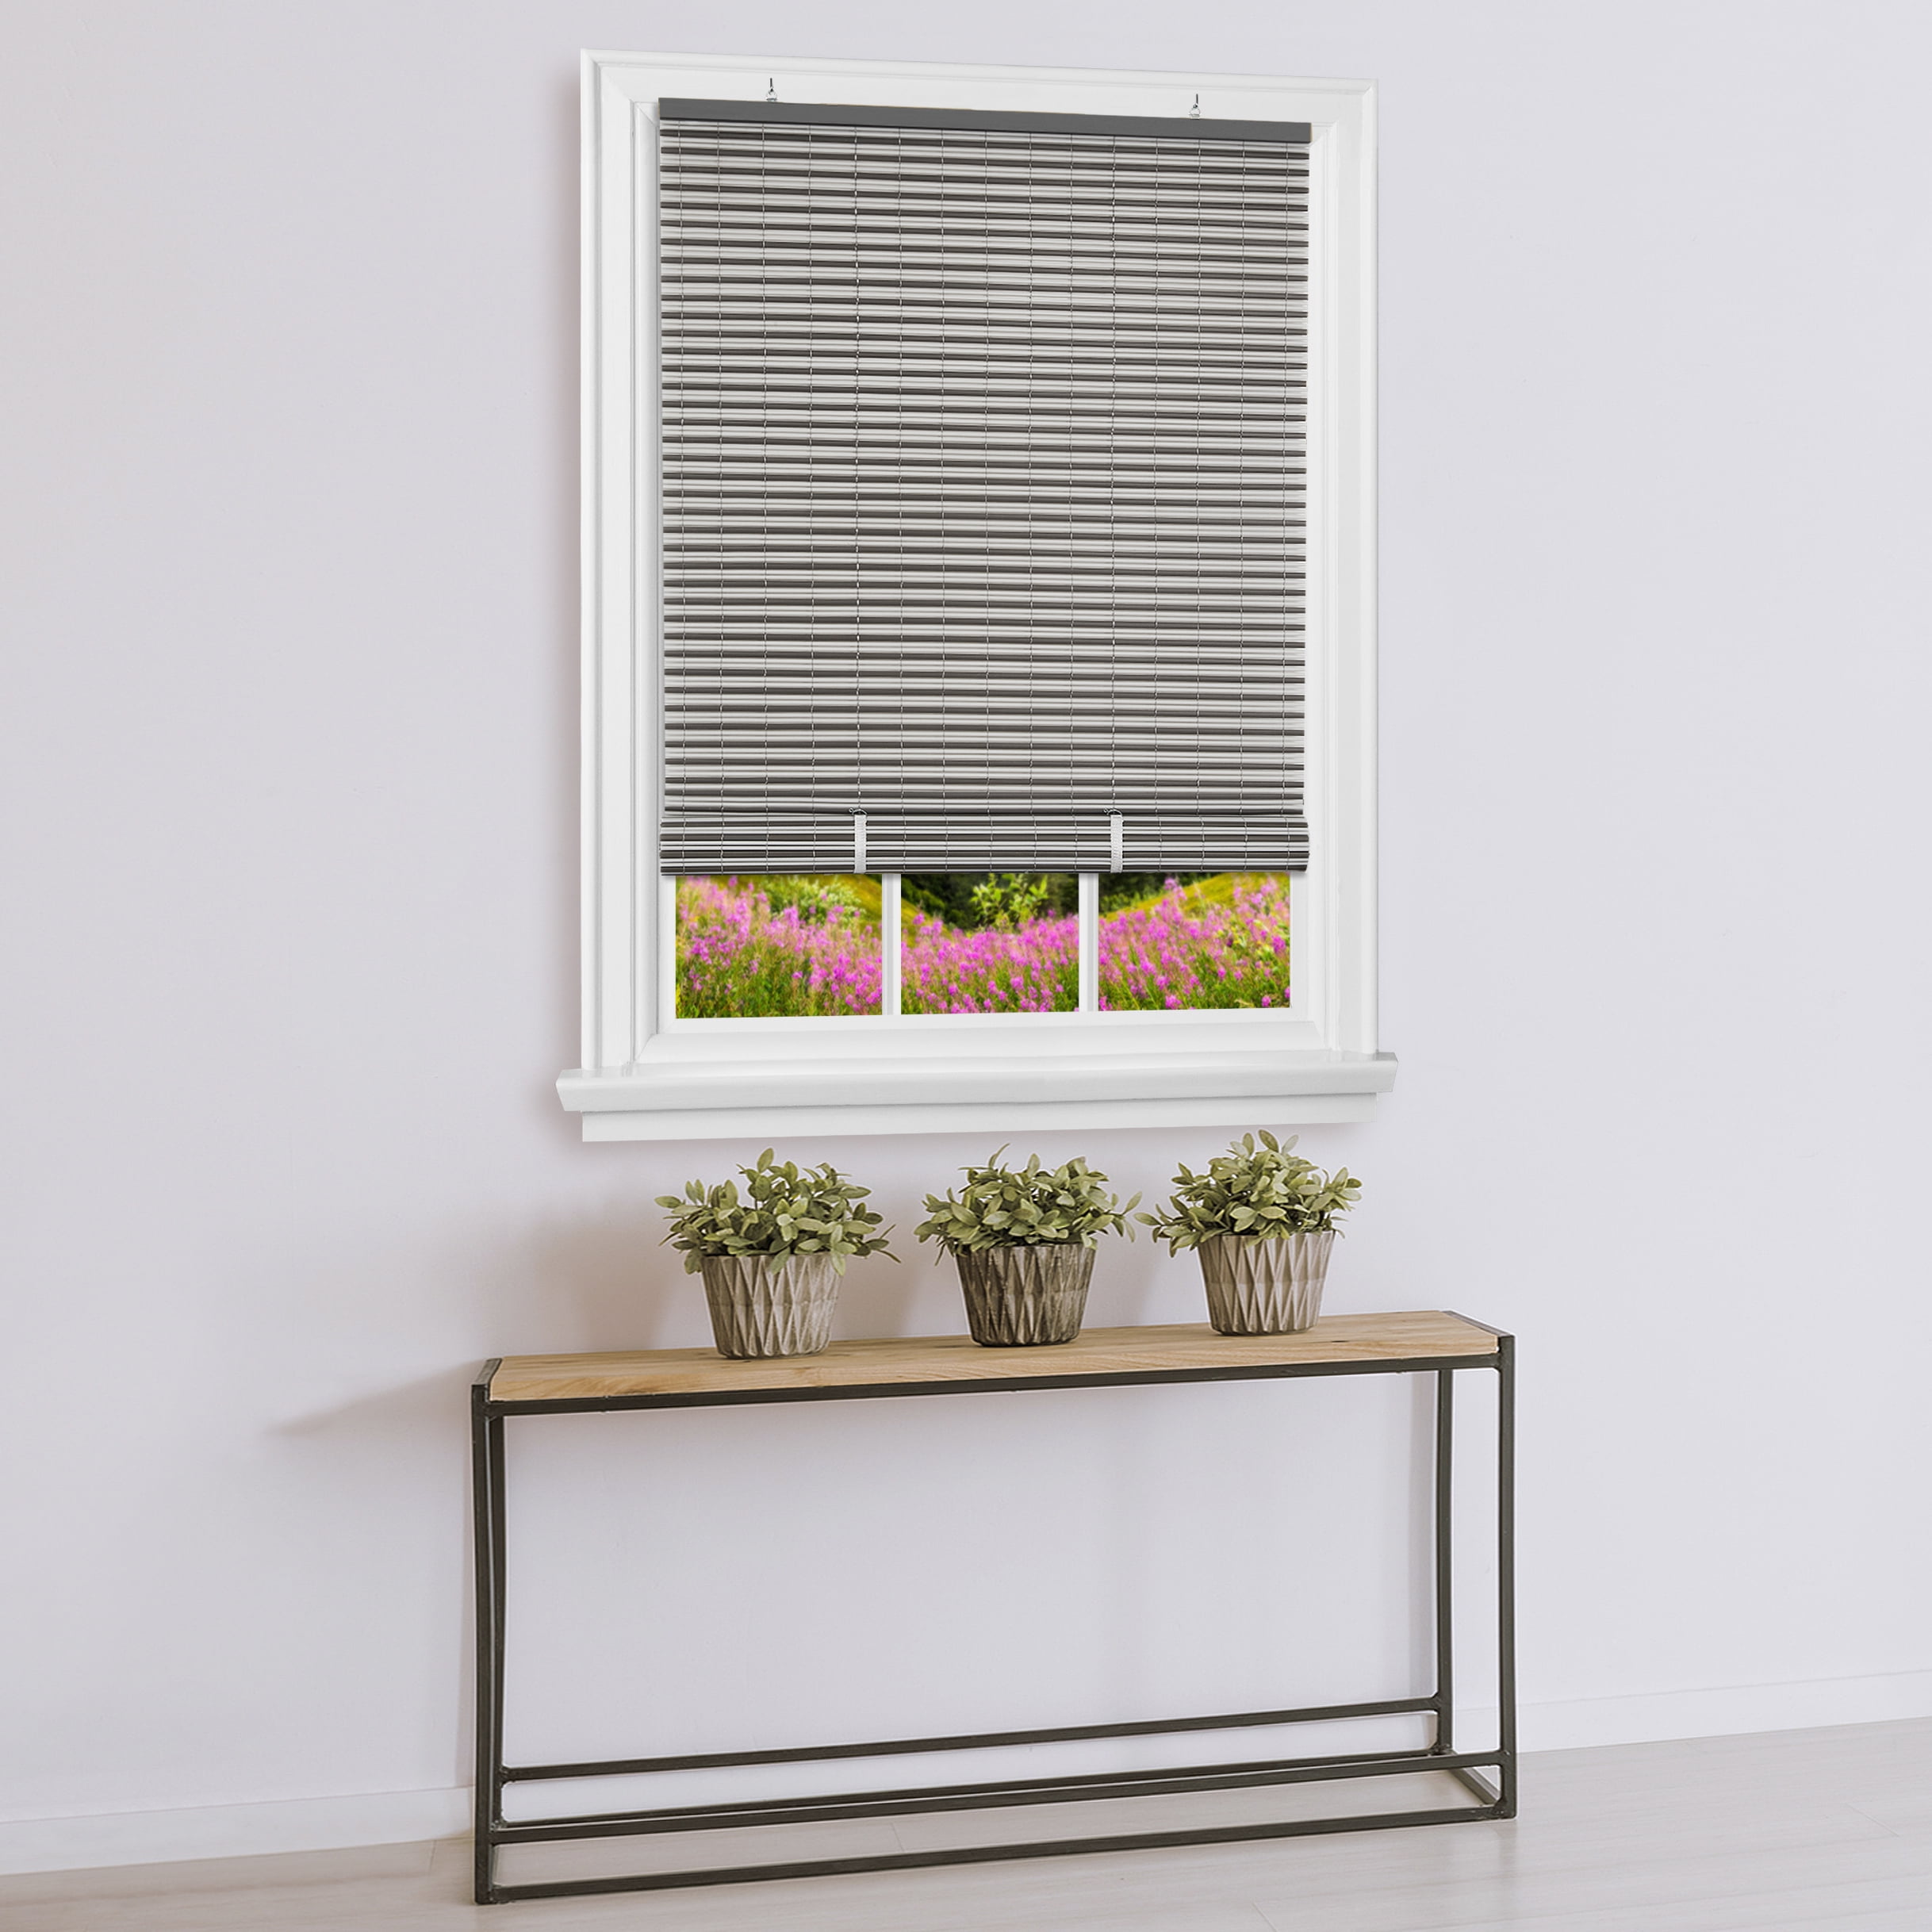 Two-Tone Oval Cordless Rollup Light Filtering Window Blinds Shades